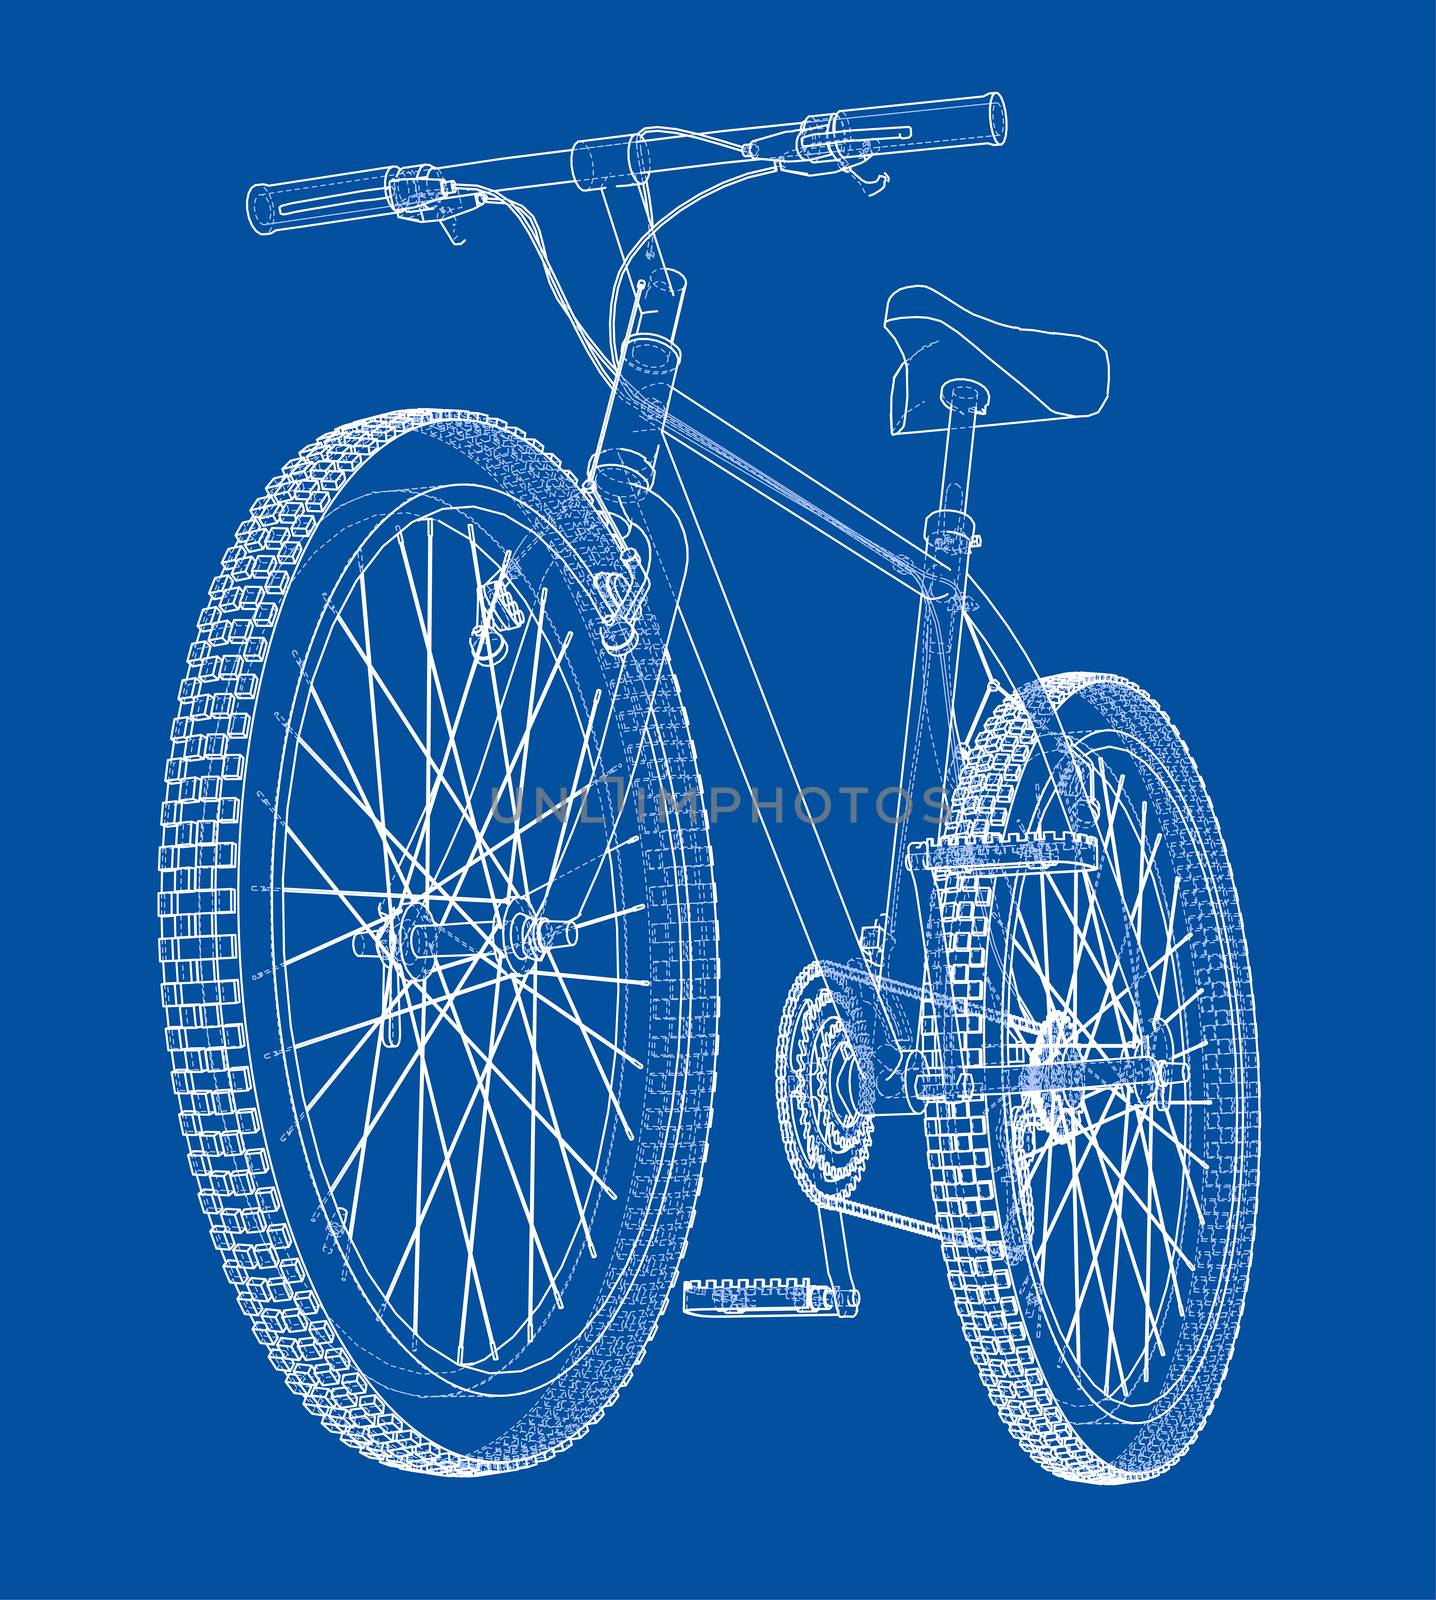 Bicycle blueprint 3d illustration. Wire-frame style on blue background